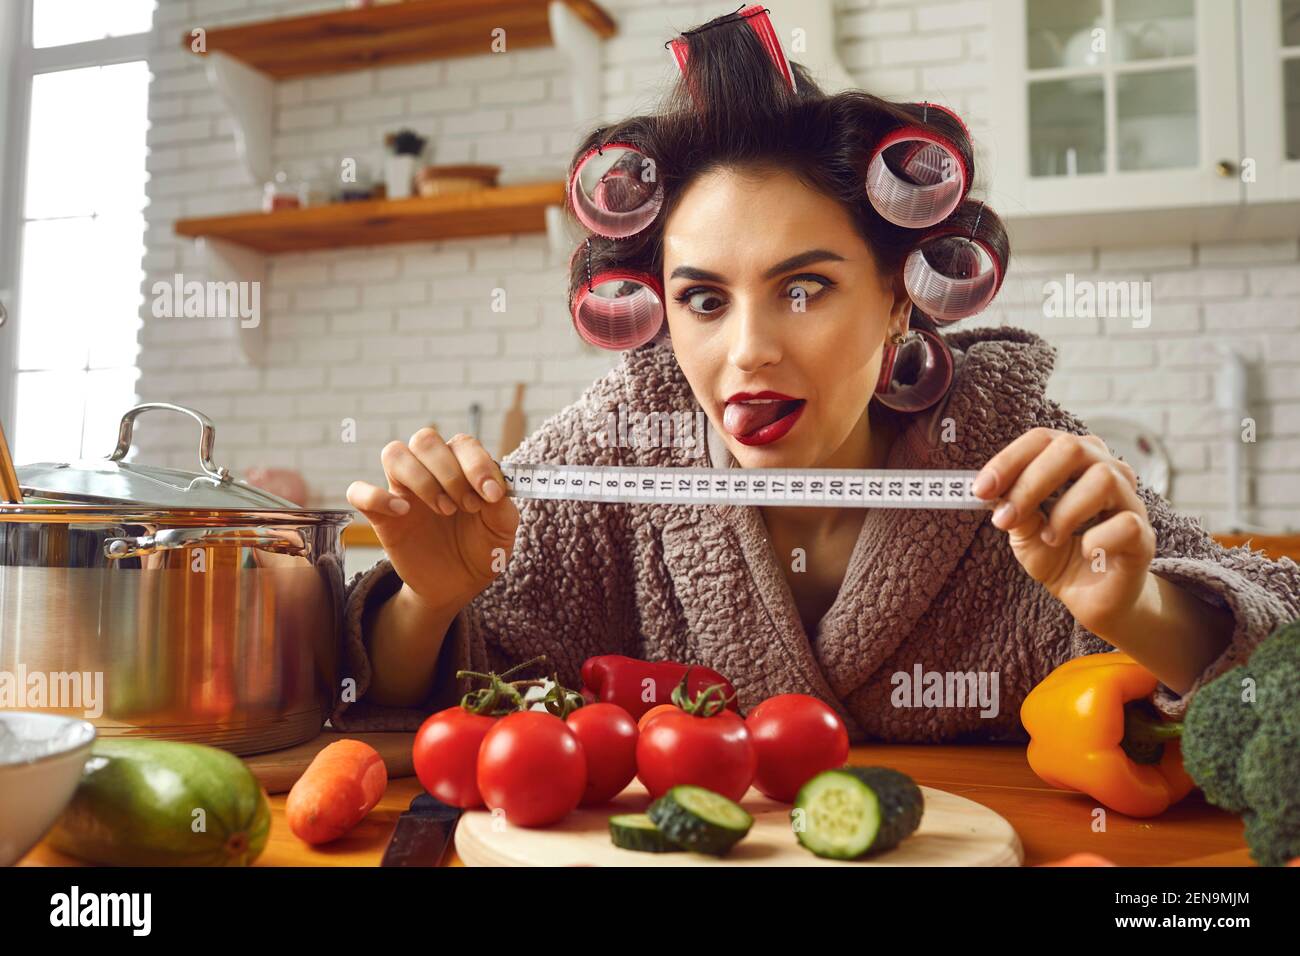 Funny crazy woman looking at tape measure while cooking healthy food in the kitchen Stock Photo